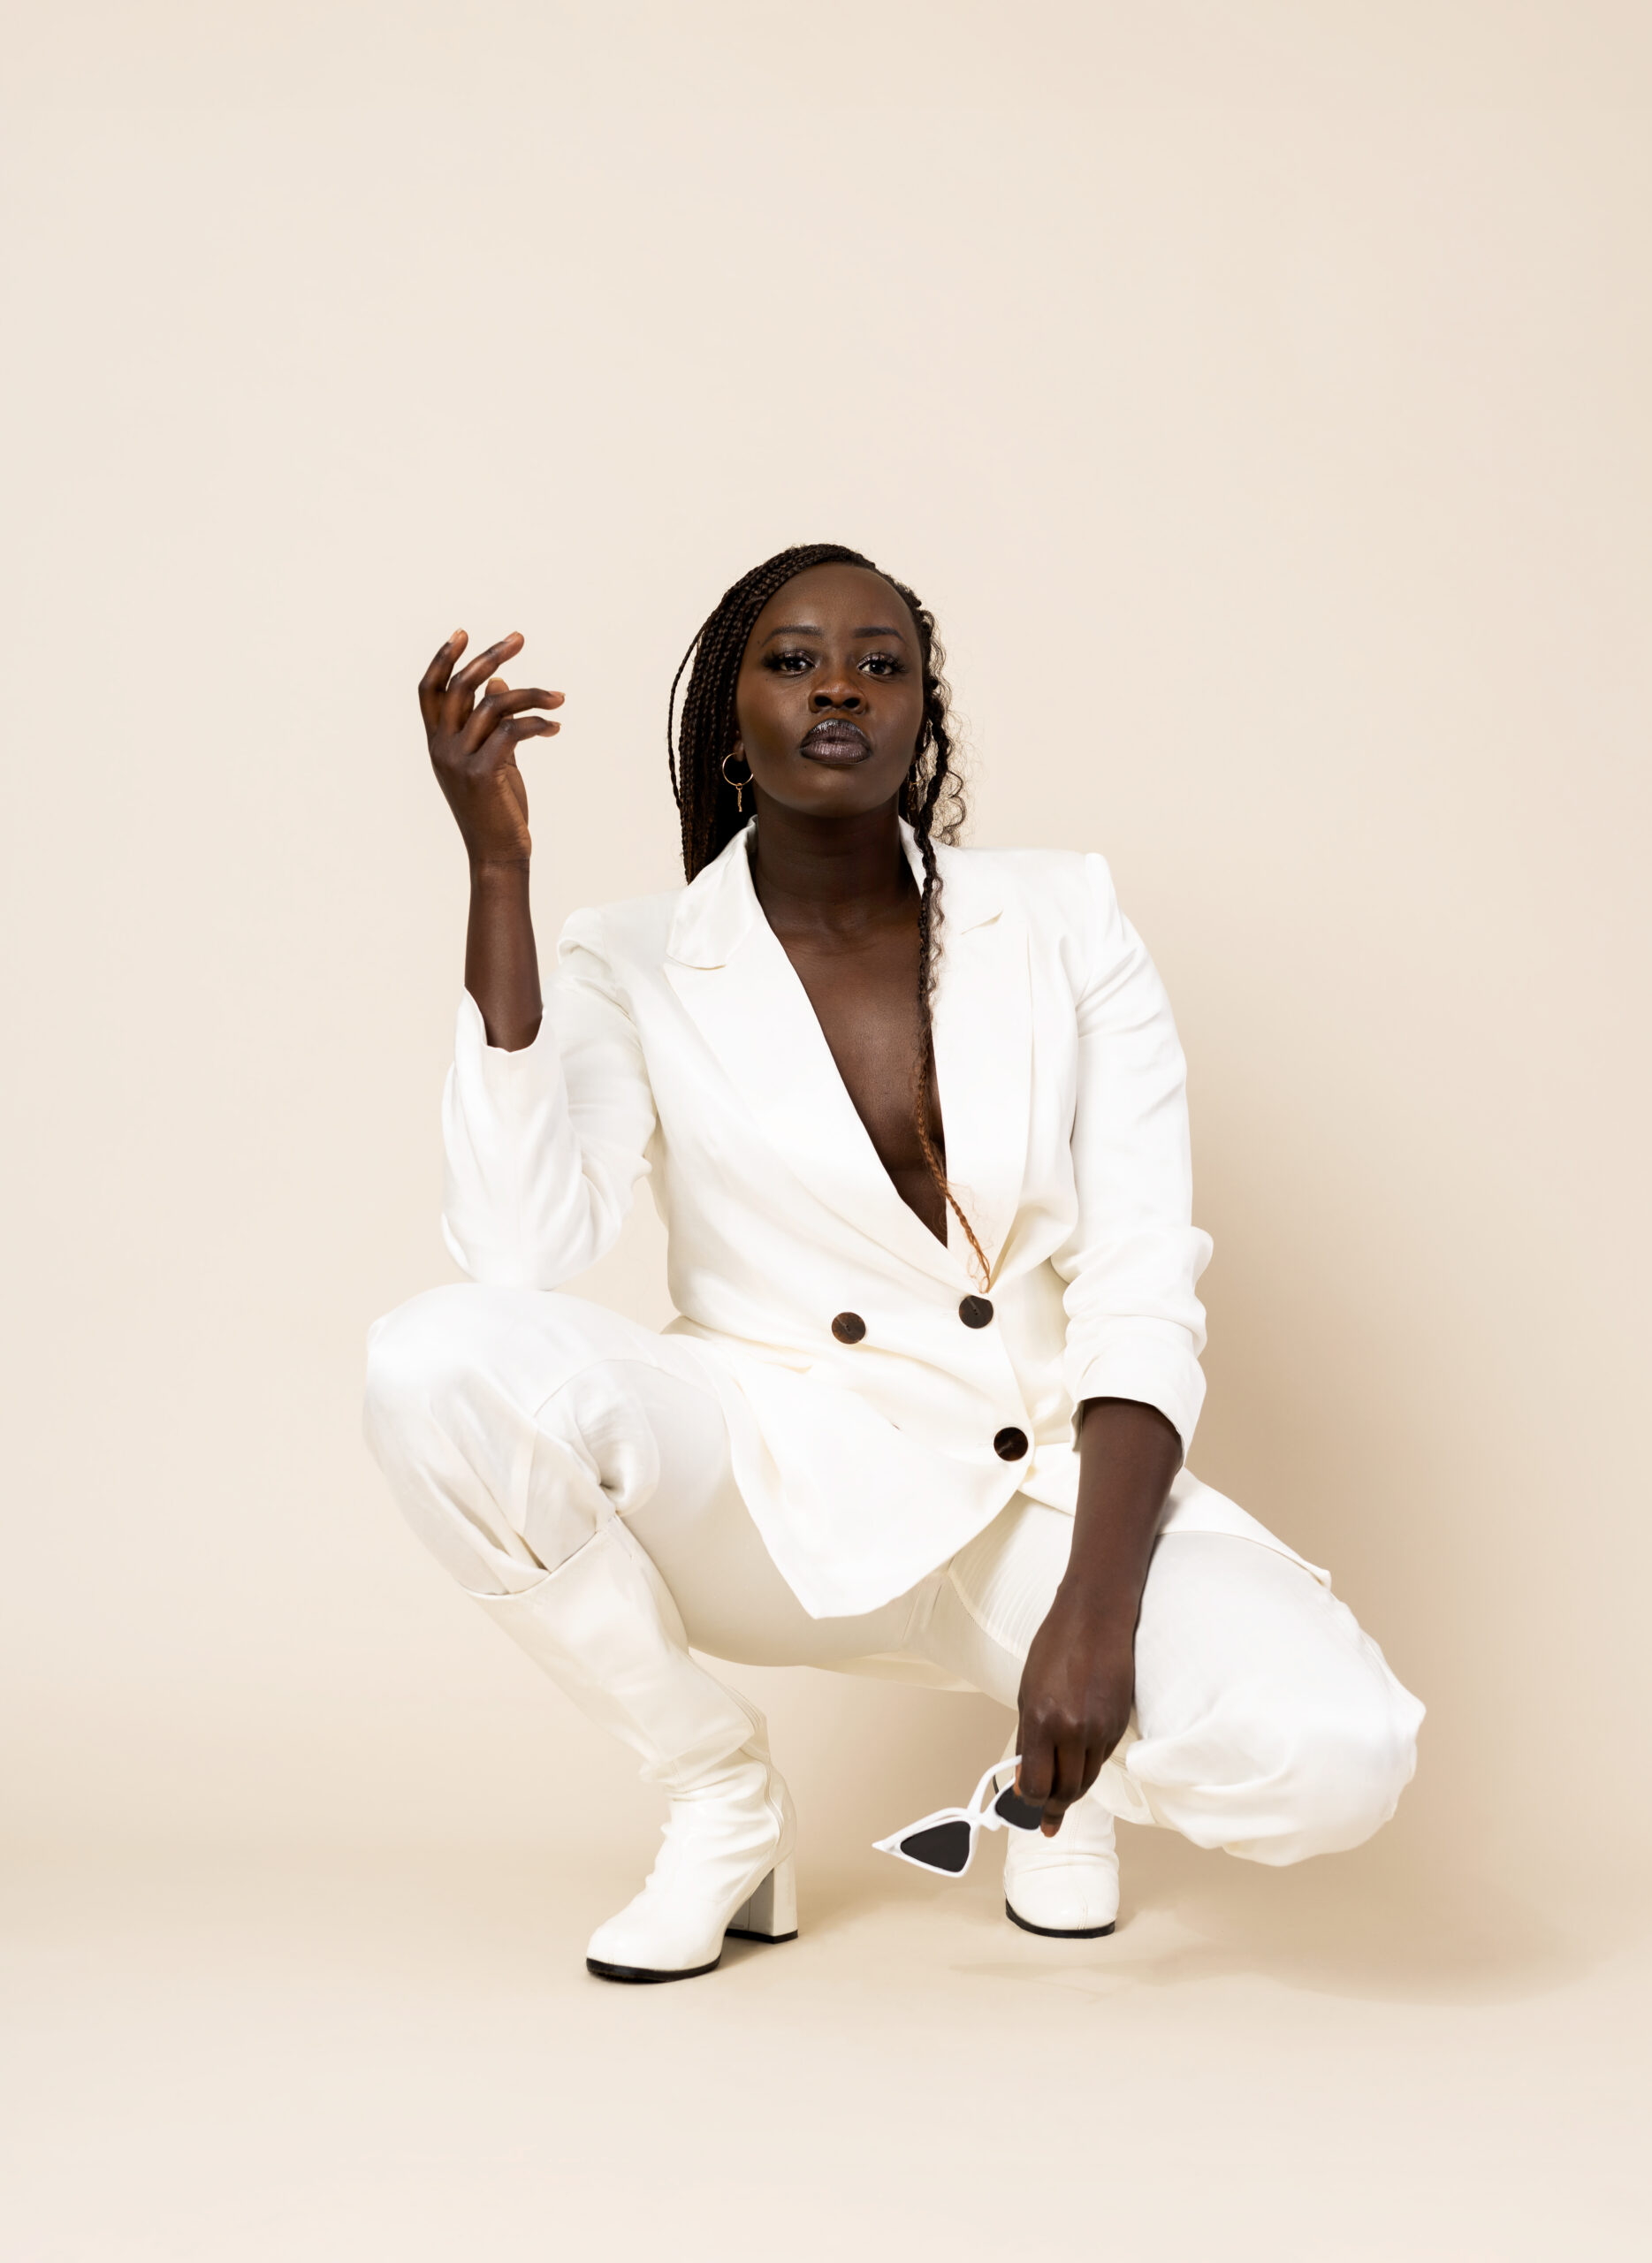 Black model crouching down while holding one hand in the air and the other hand holding sunglasses while wearing a white suit against a cream backdrop.